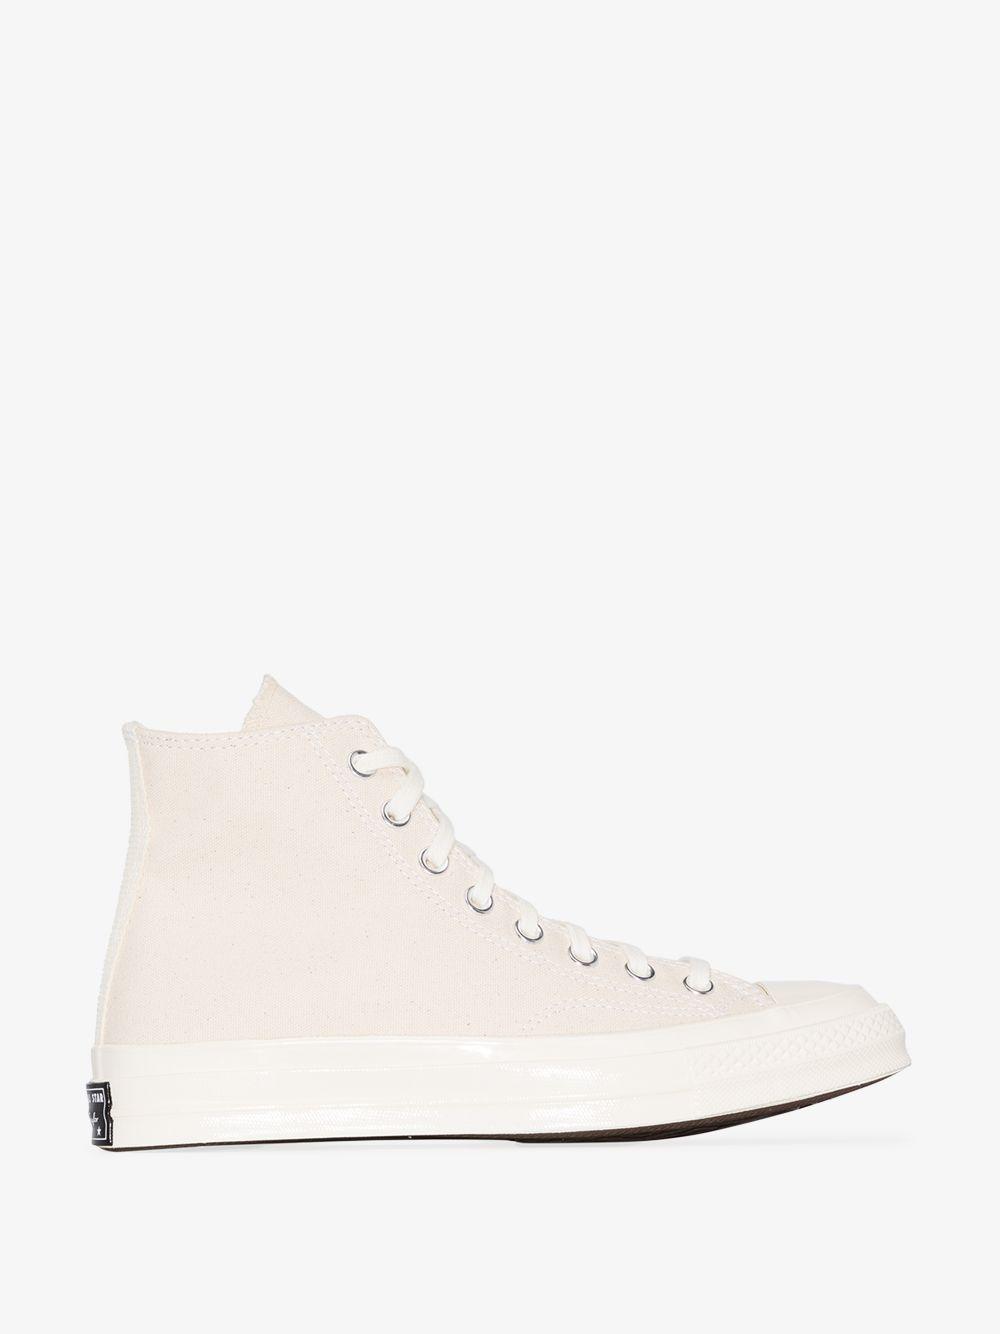 Converse Cream Chuck 70 High Top Sneakers in White | Lyst